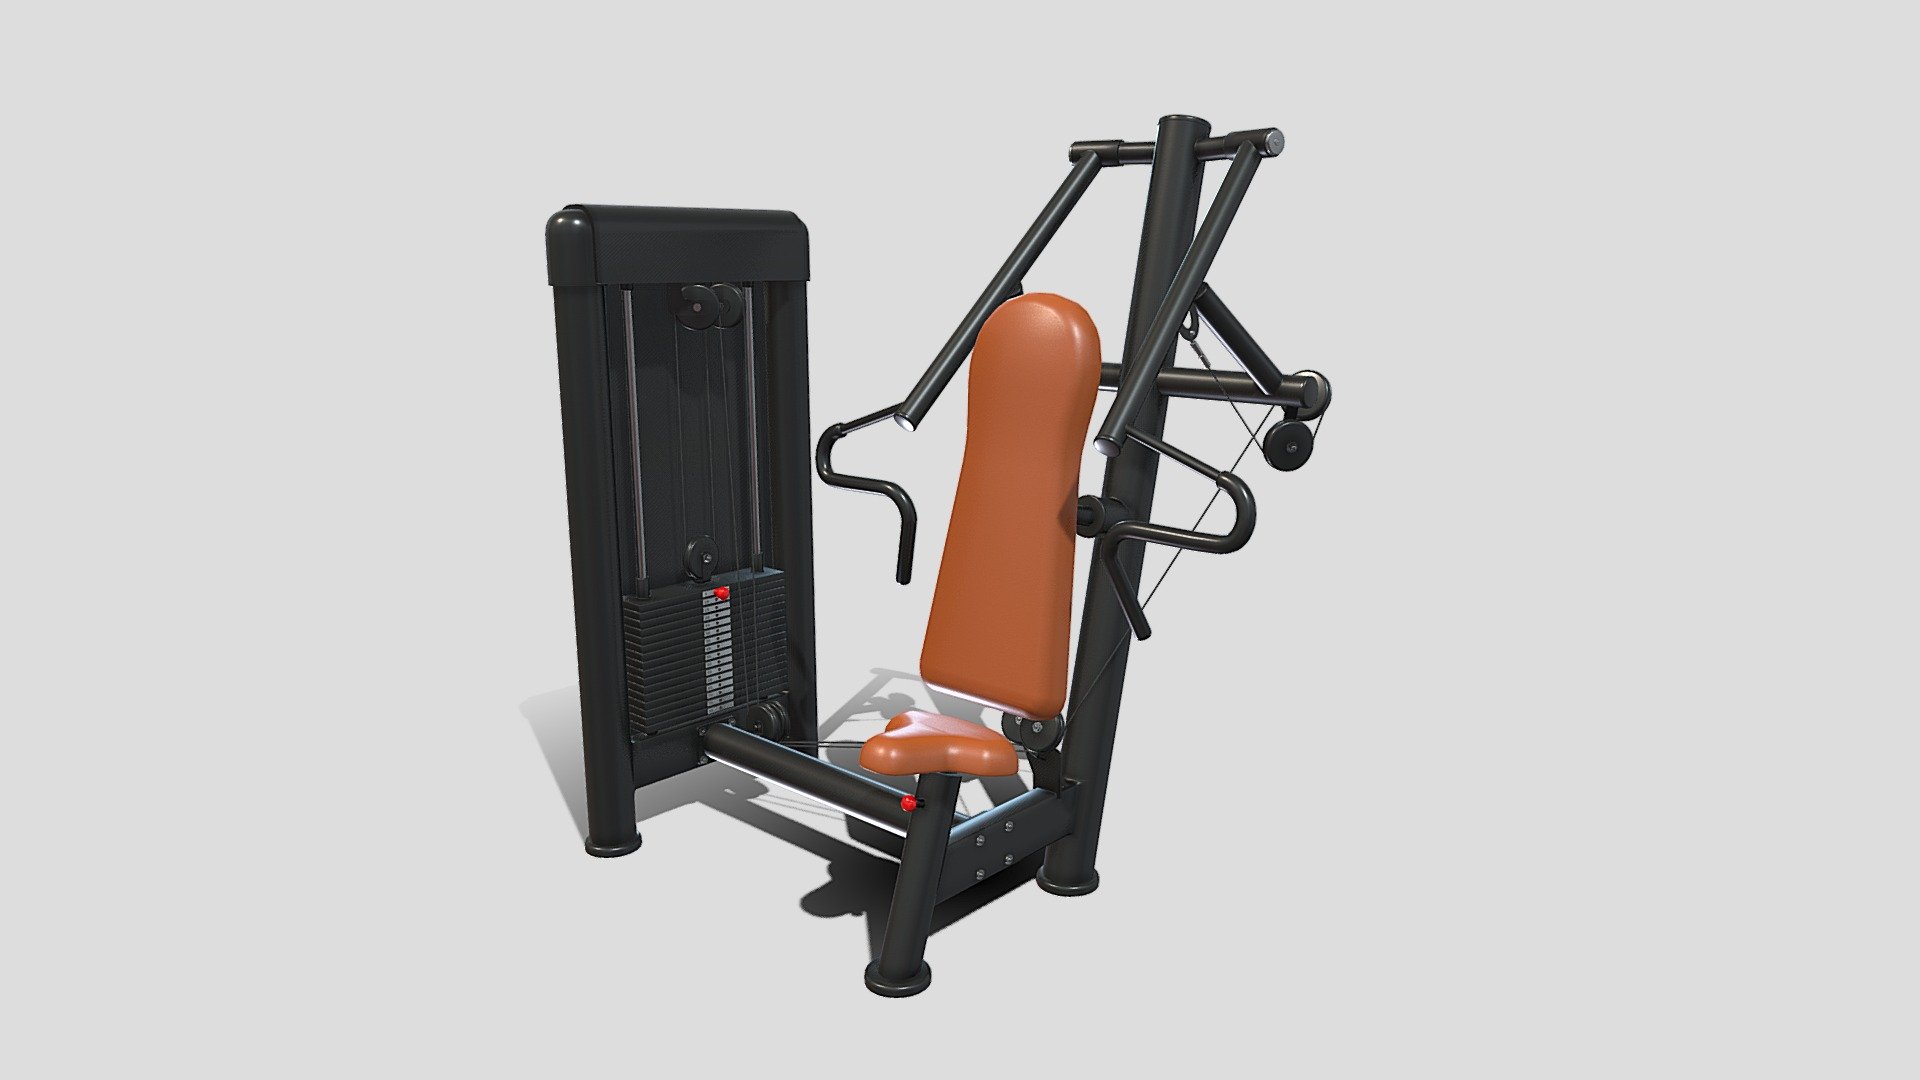 Gym machine 3d model built to real size, rendered with Cycles in Blender, as per seen on attached images. 

File formats:
-.blend, rendered with cycles, as seen in the images;
-.obj, with materials applied;
-.dae, with materials applied;
-.fbx, with materials applied;
-.stl;

Files come named appropriately and split by file format.

3D Software:
The 3D model was originally created in Blender 3.1 and rendered with Cycles.

Materials and textures:
The models have materials applied in all formats, and are ready to import and render.
Materials are image based using PBR, the model comes with five 4k png image textures.

Preview scenes:
The preview images are rendered in Blender using its built-in render engine &lsquo;Cycles'.
Note that the blend files come directly with the rendering scene included and the render command will generate the exact result as seen in previews.

General:
The models are built mostly out of quads.

For any problems please feel free to contact me.

Don't forget to rate and enjoy! - Inclined chest press machine - Buy Royalty Free 3D model by dragosburian 3d model